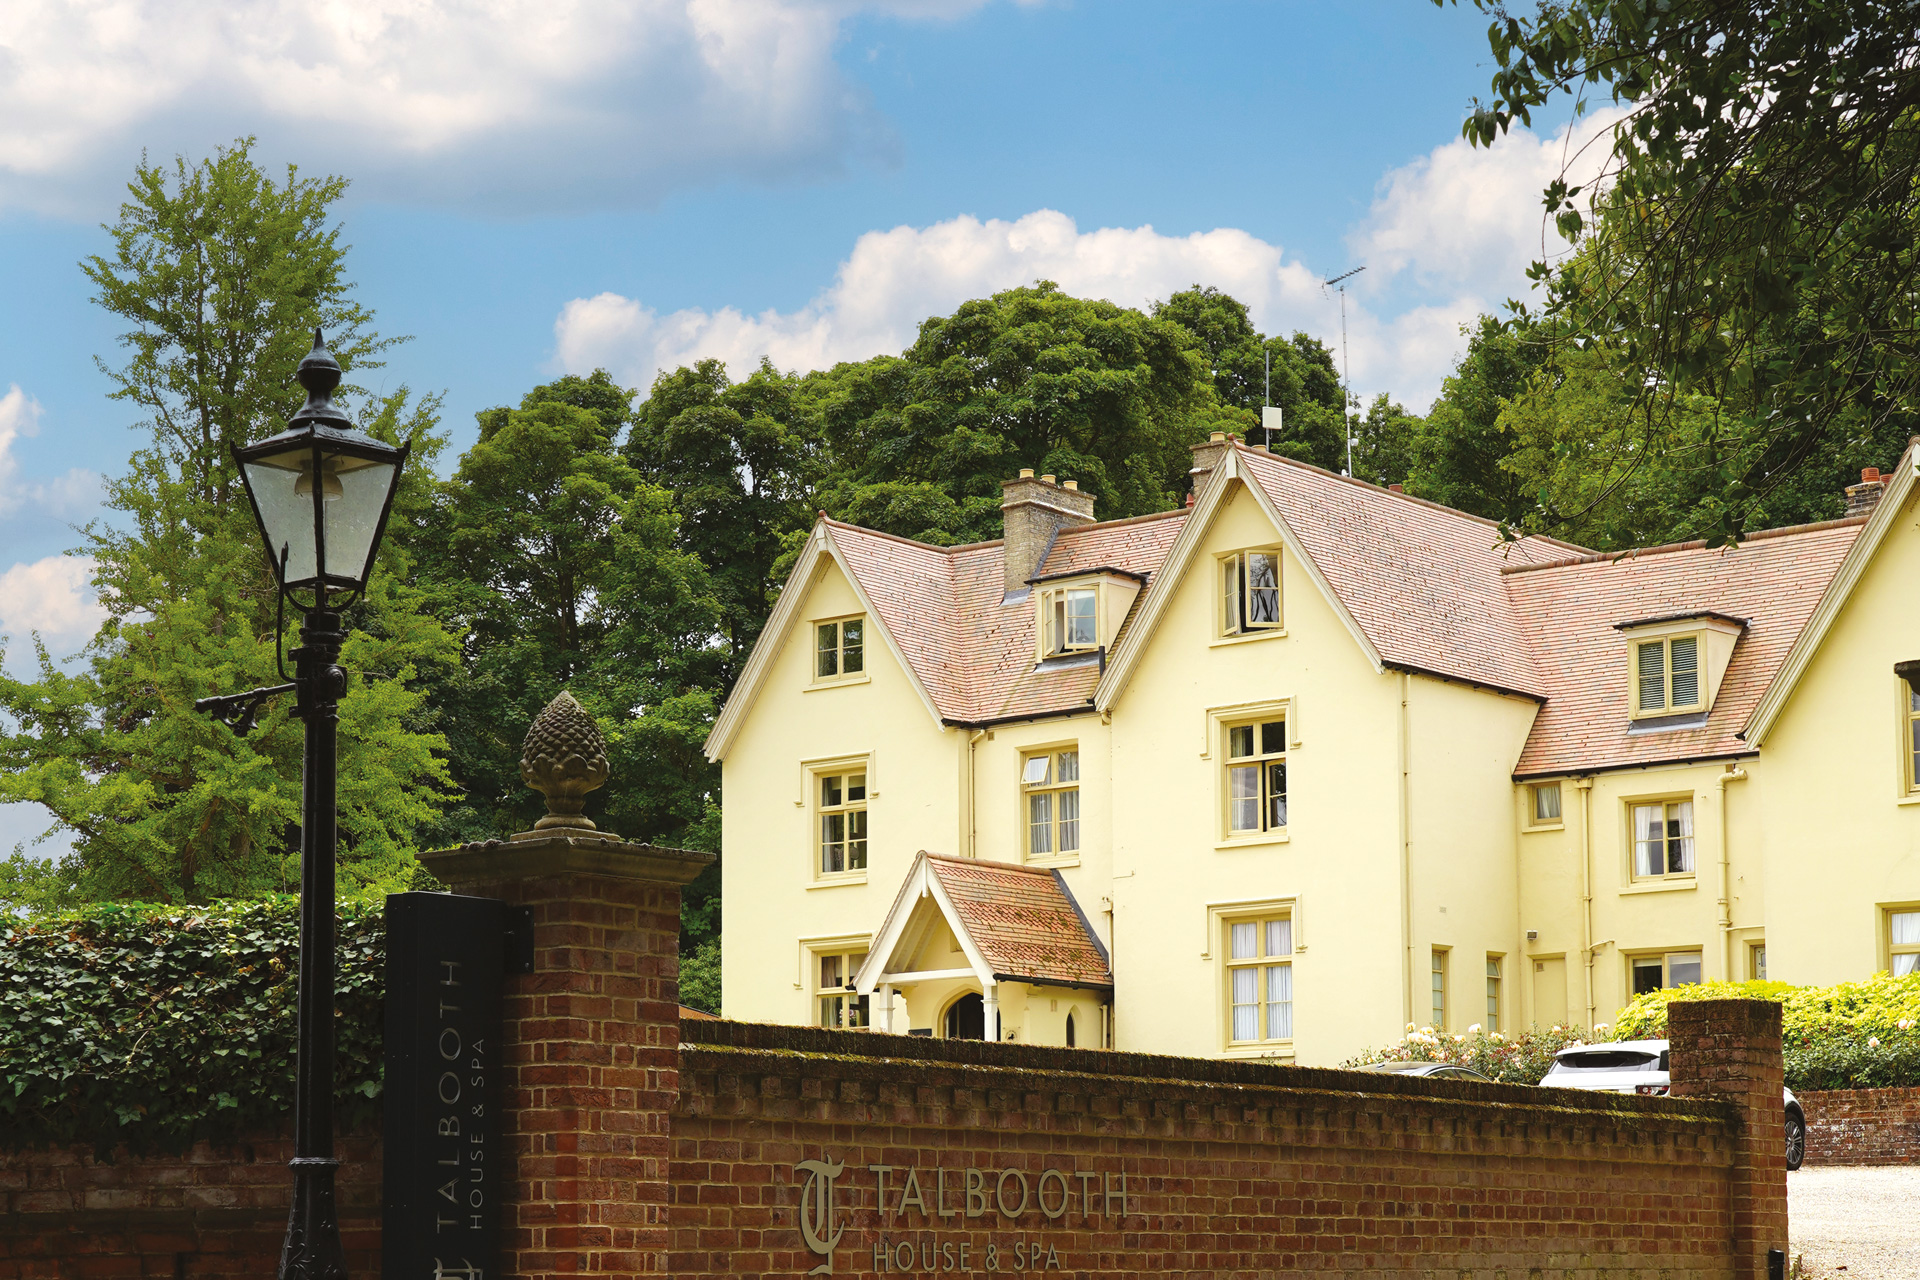 Exterior at Talbooth House & Spa